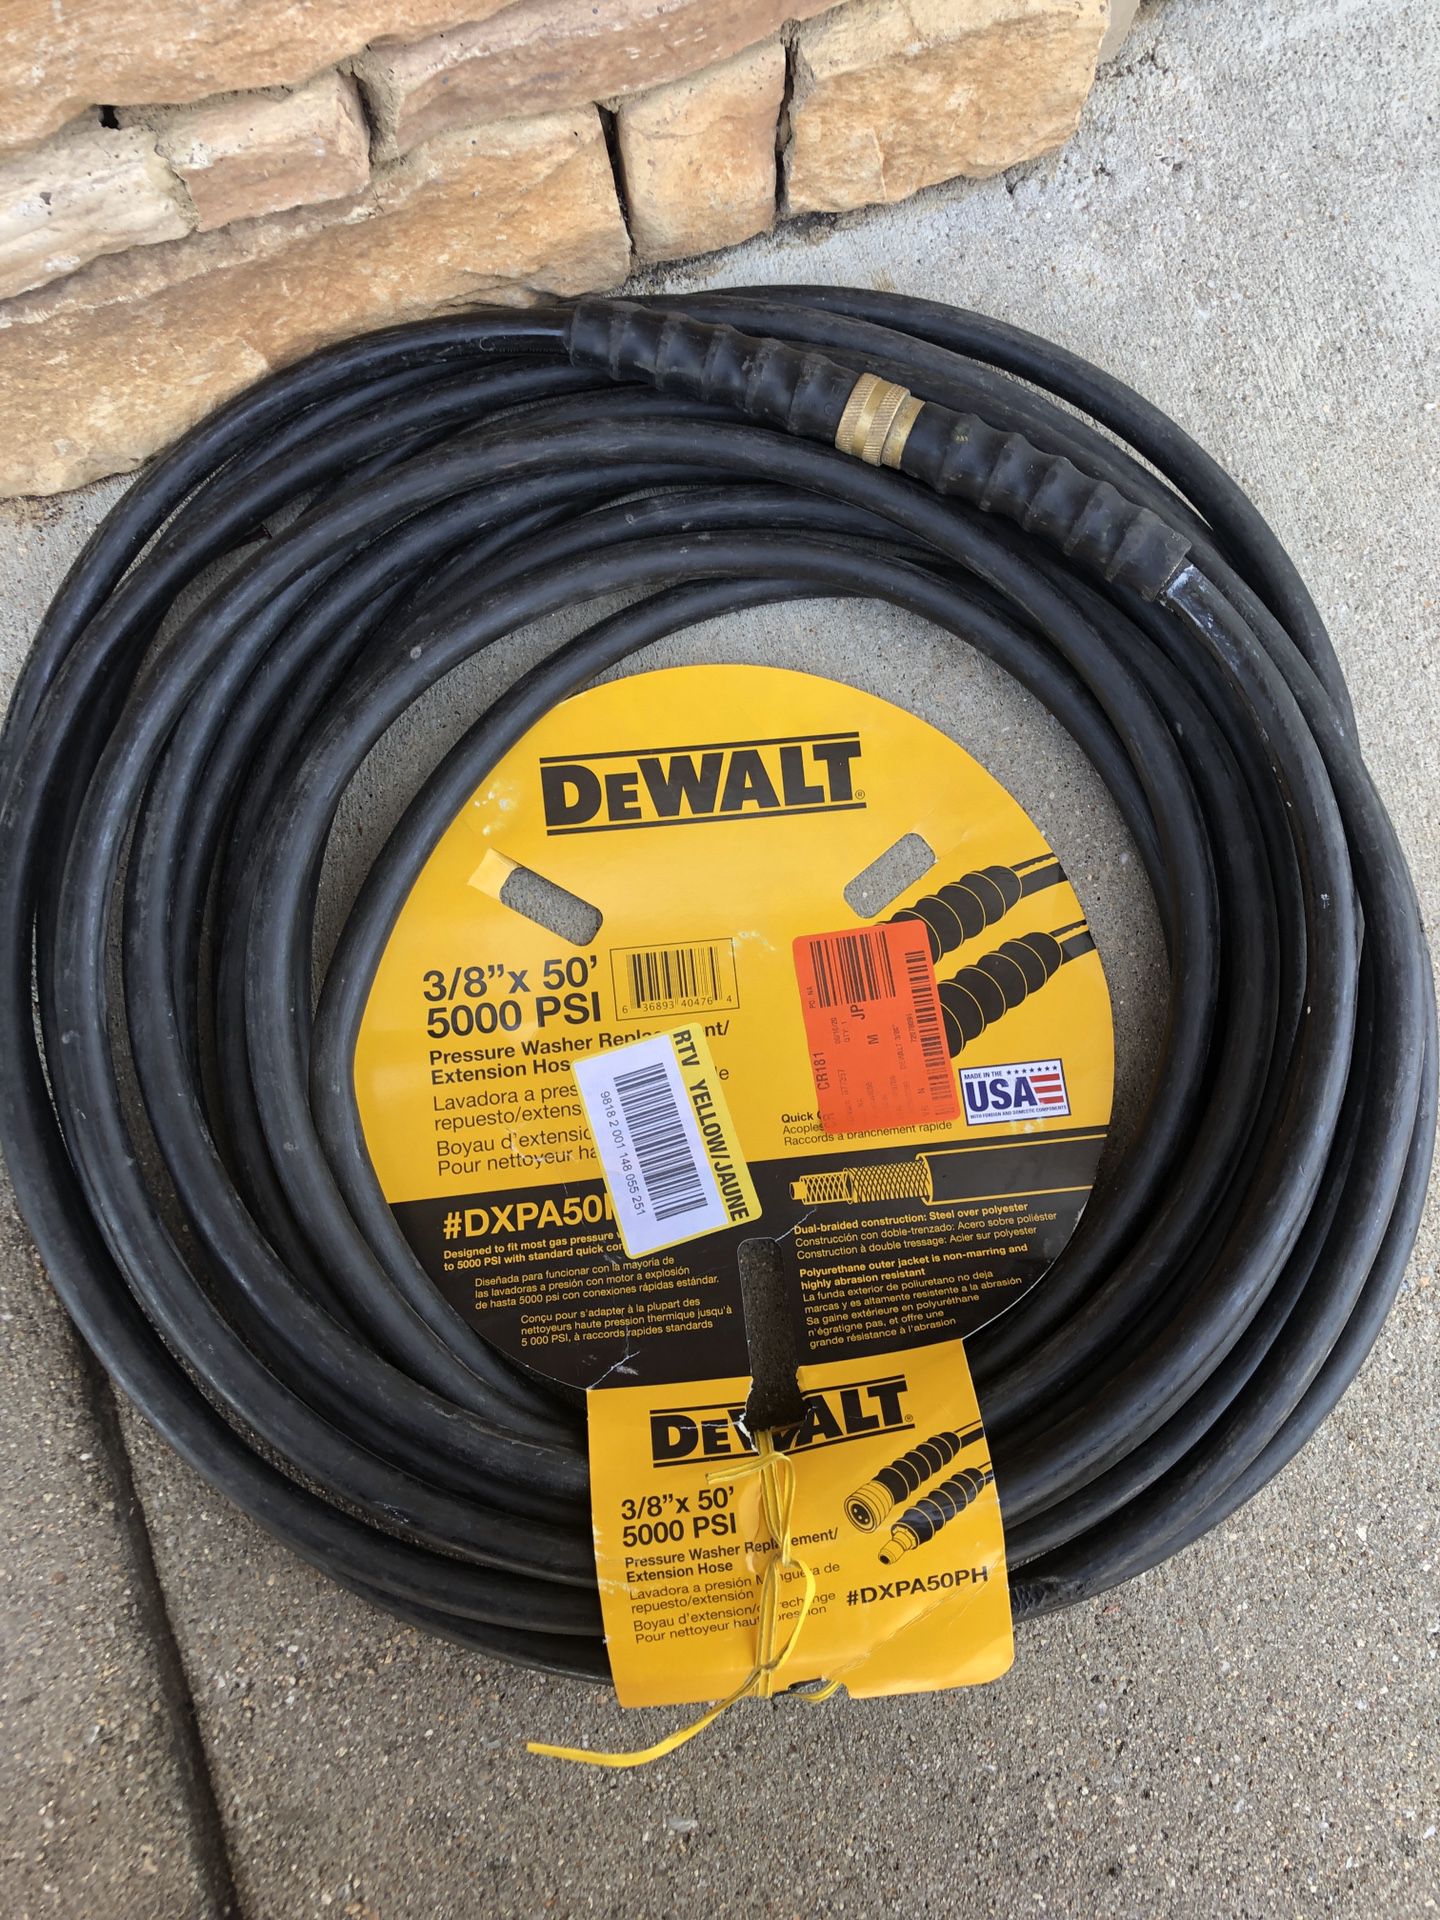 DeWALT 3/8 in. x 50 ft. 5000 PSI Replacement/Extension Hose